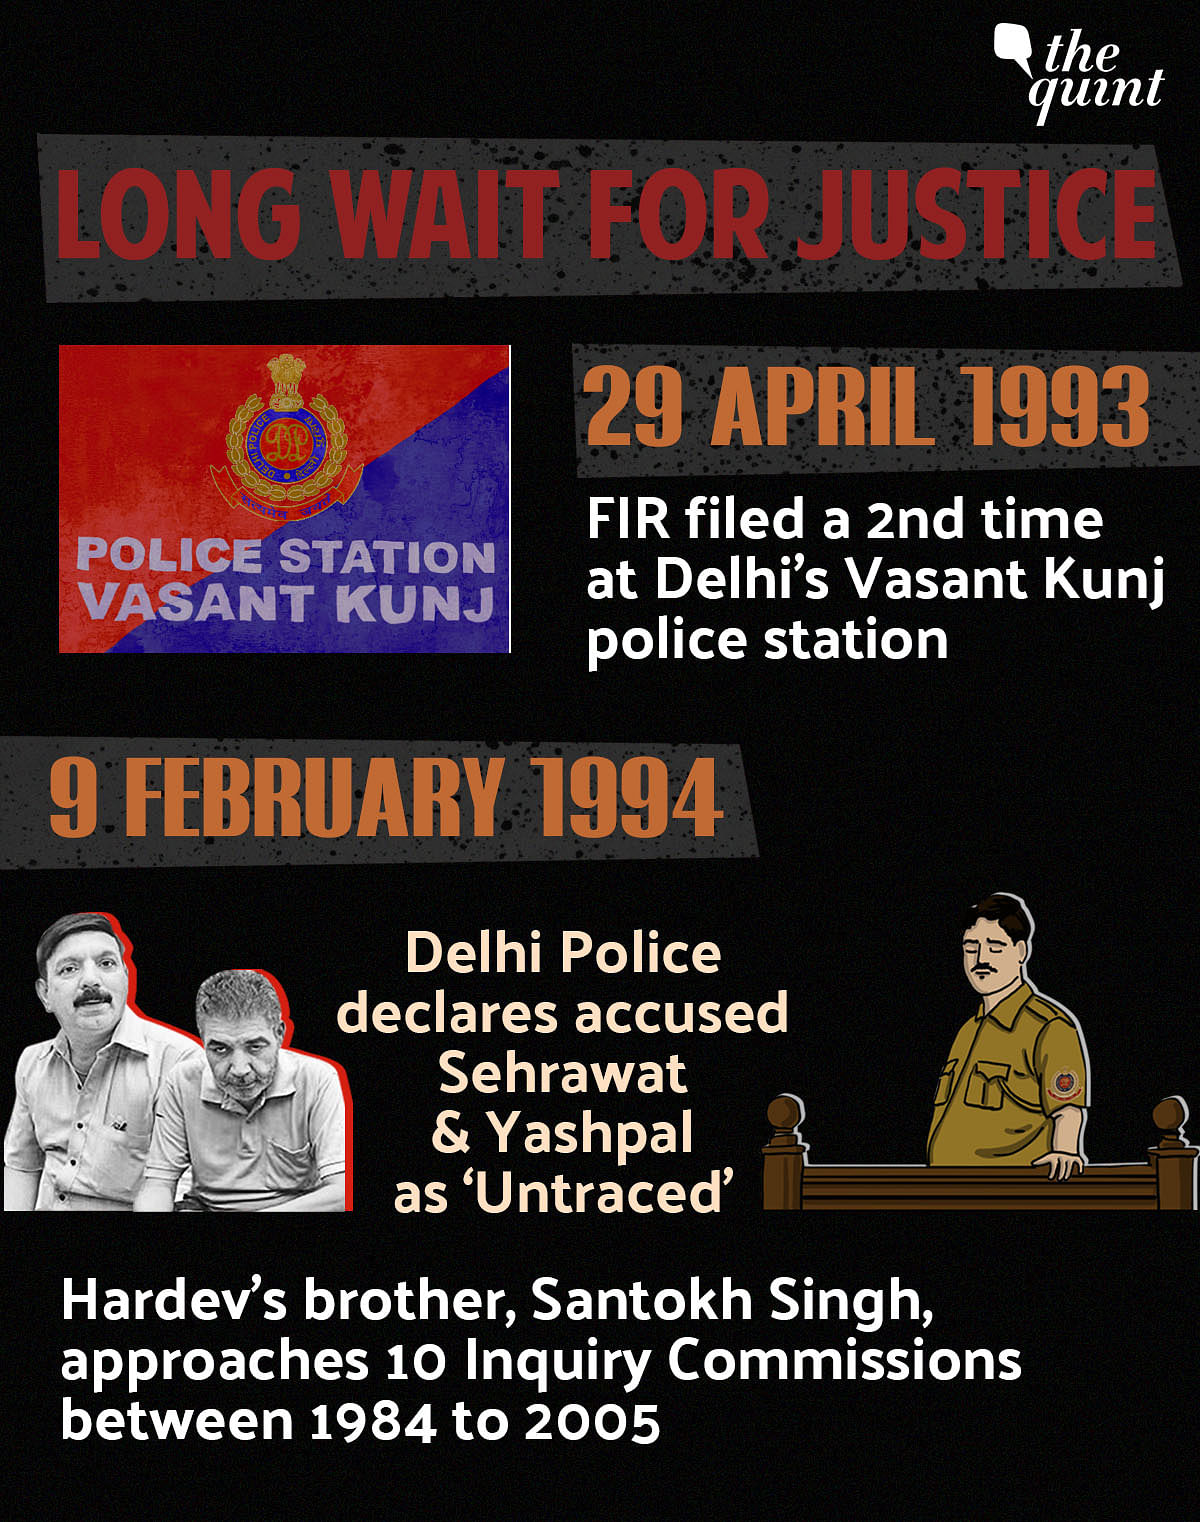 34 years after Santokh  lost his brother in 1984 riots, a court has sentenced one to death. Has justice been done?